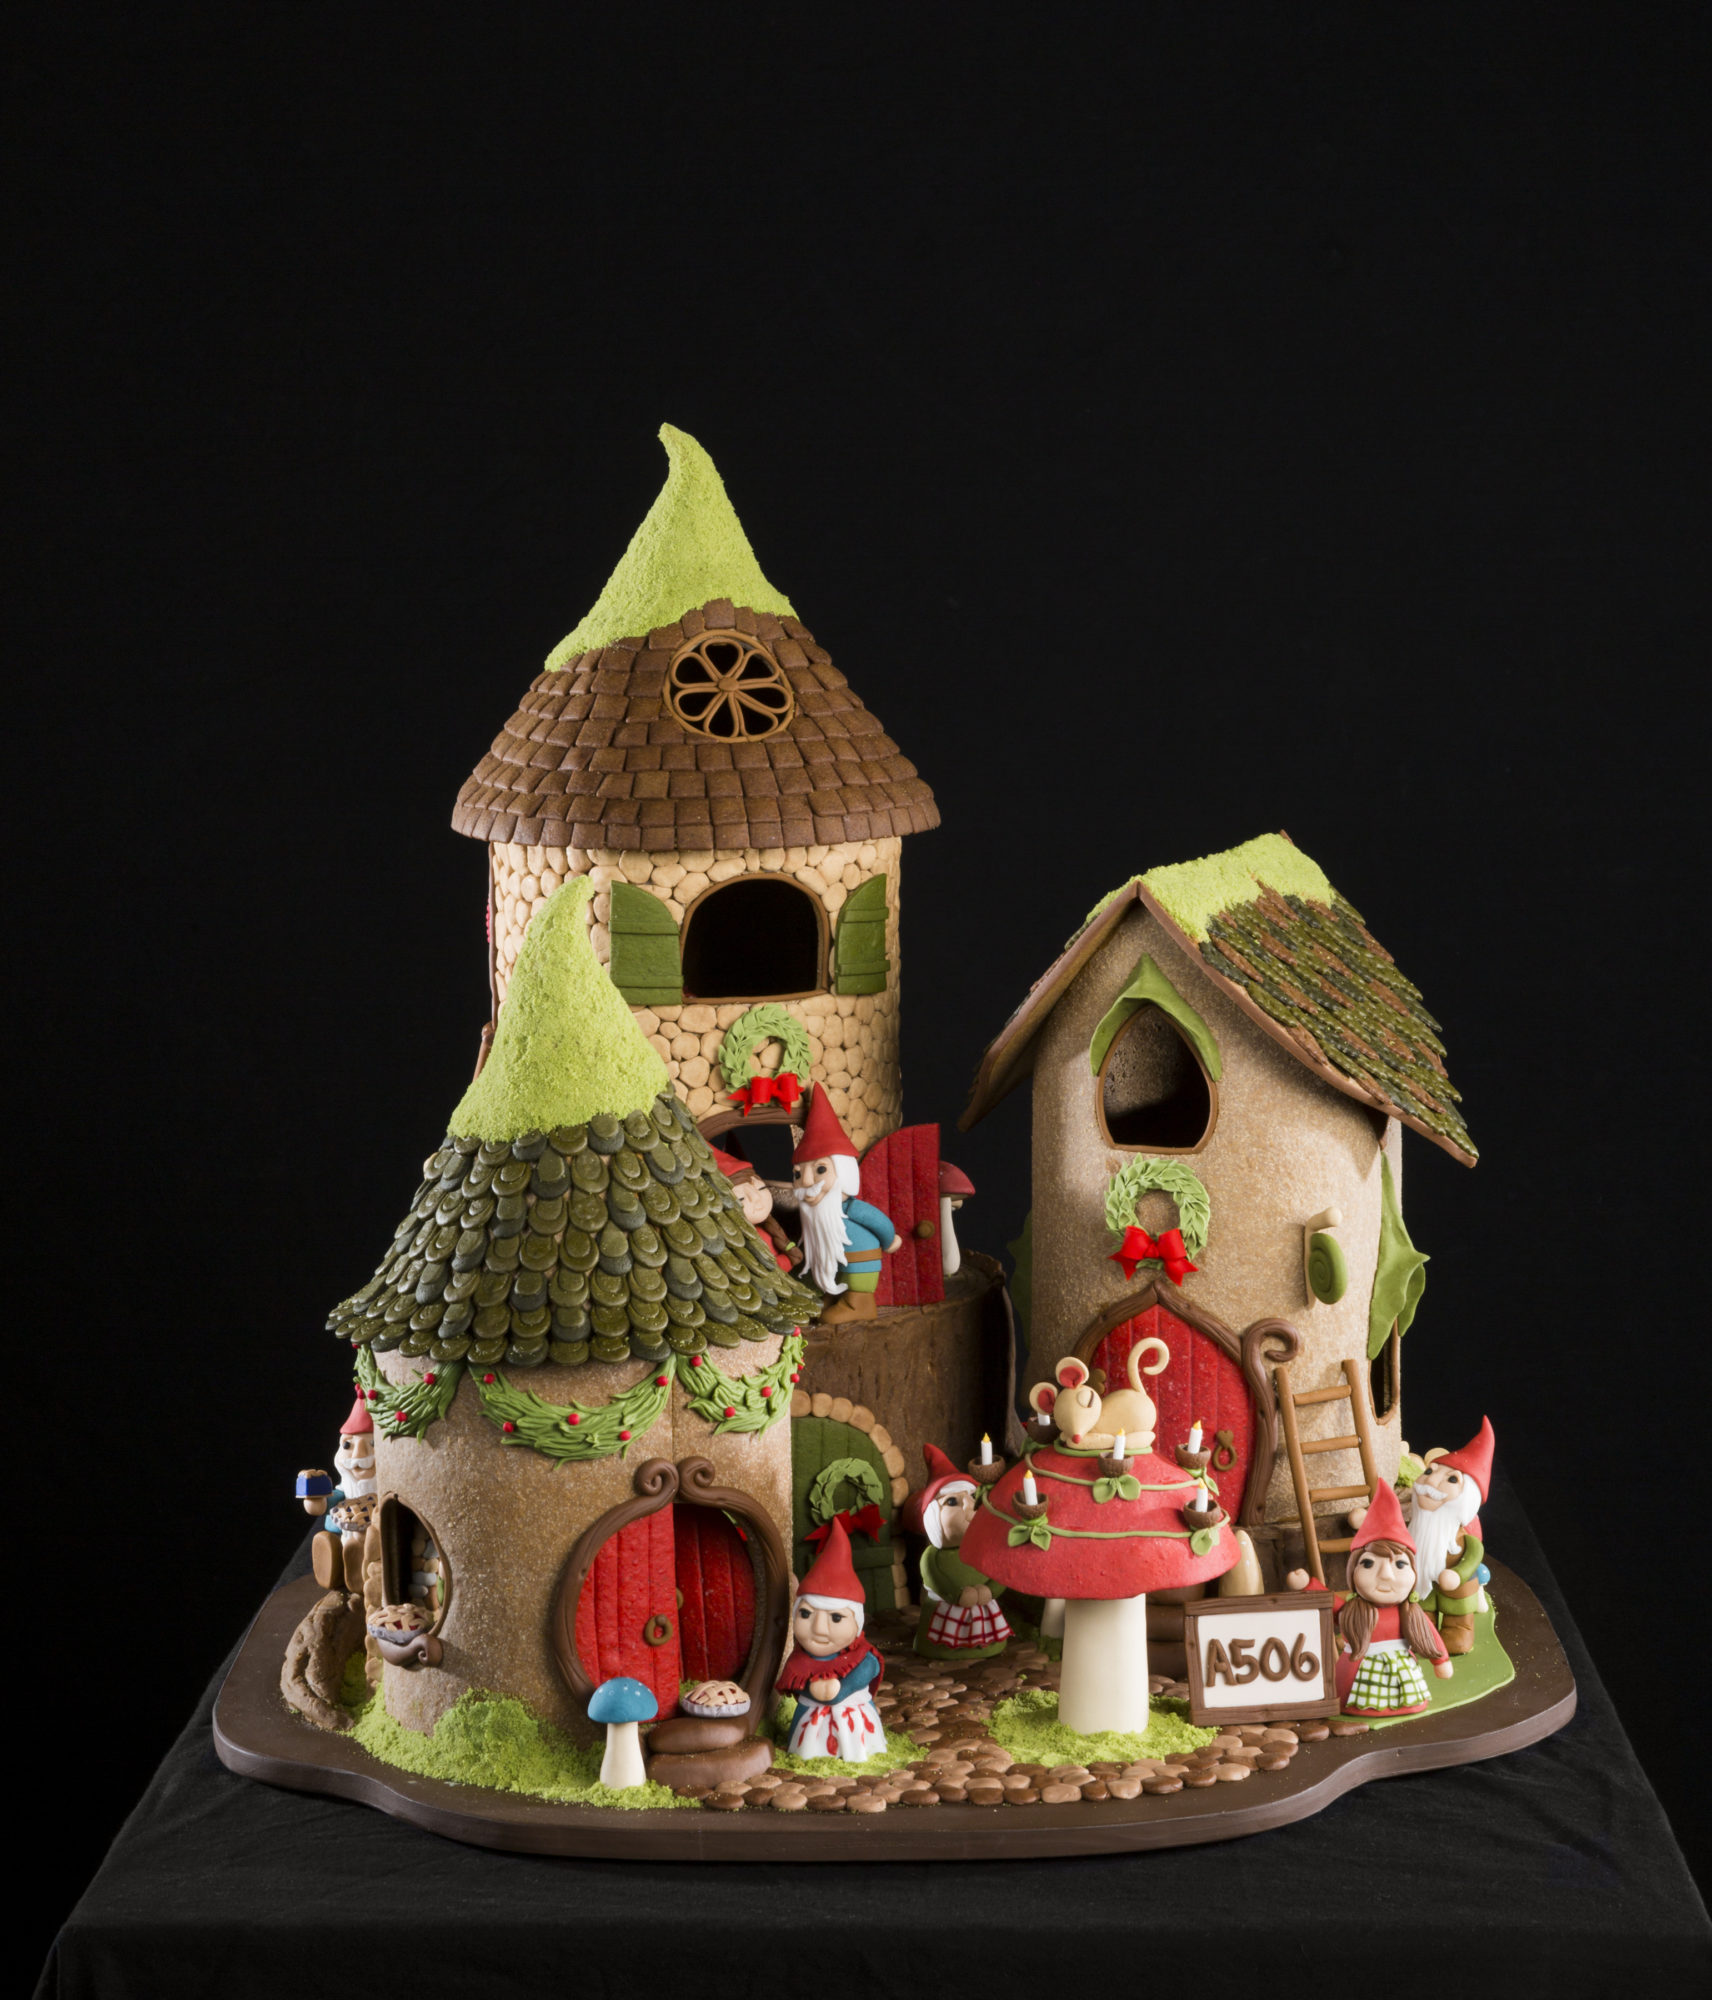 ornate gingerbread dwarf house with three sections of homes, mice, a ladder, and a mushroom.